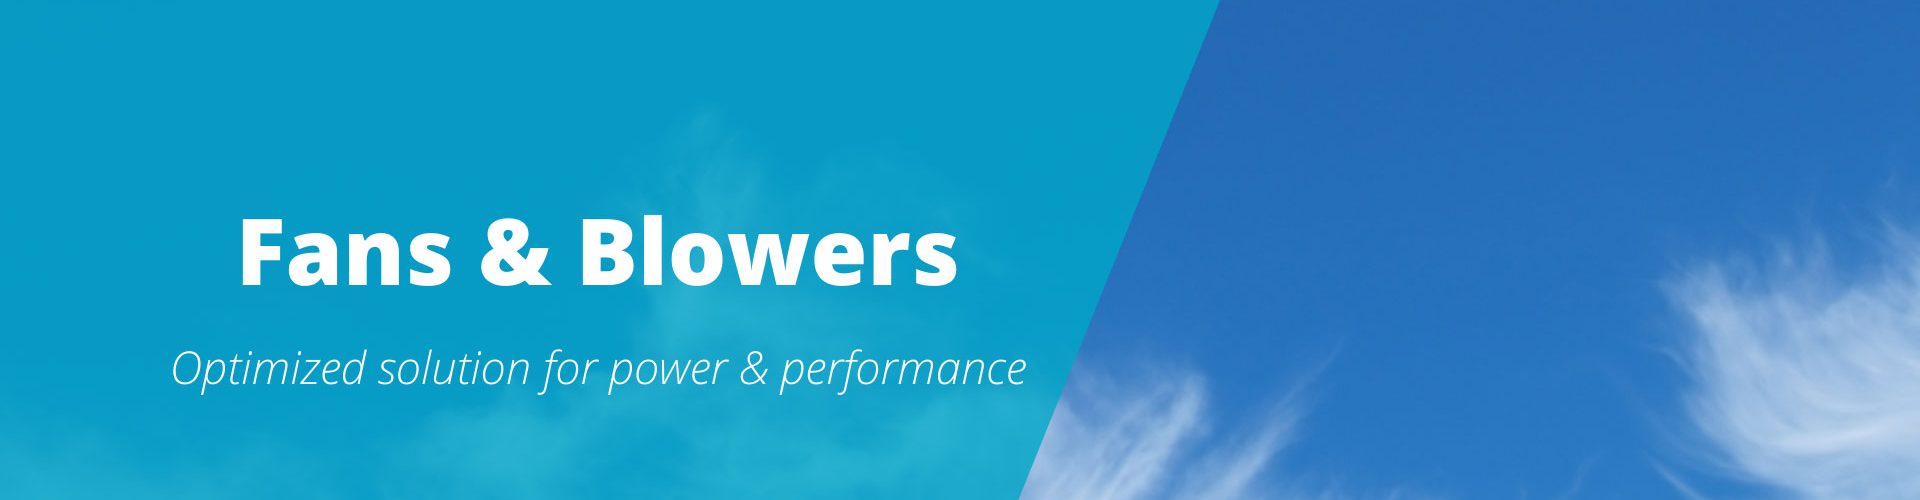 Fans and Blowers for the optimized power solution and peak performing power